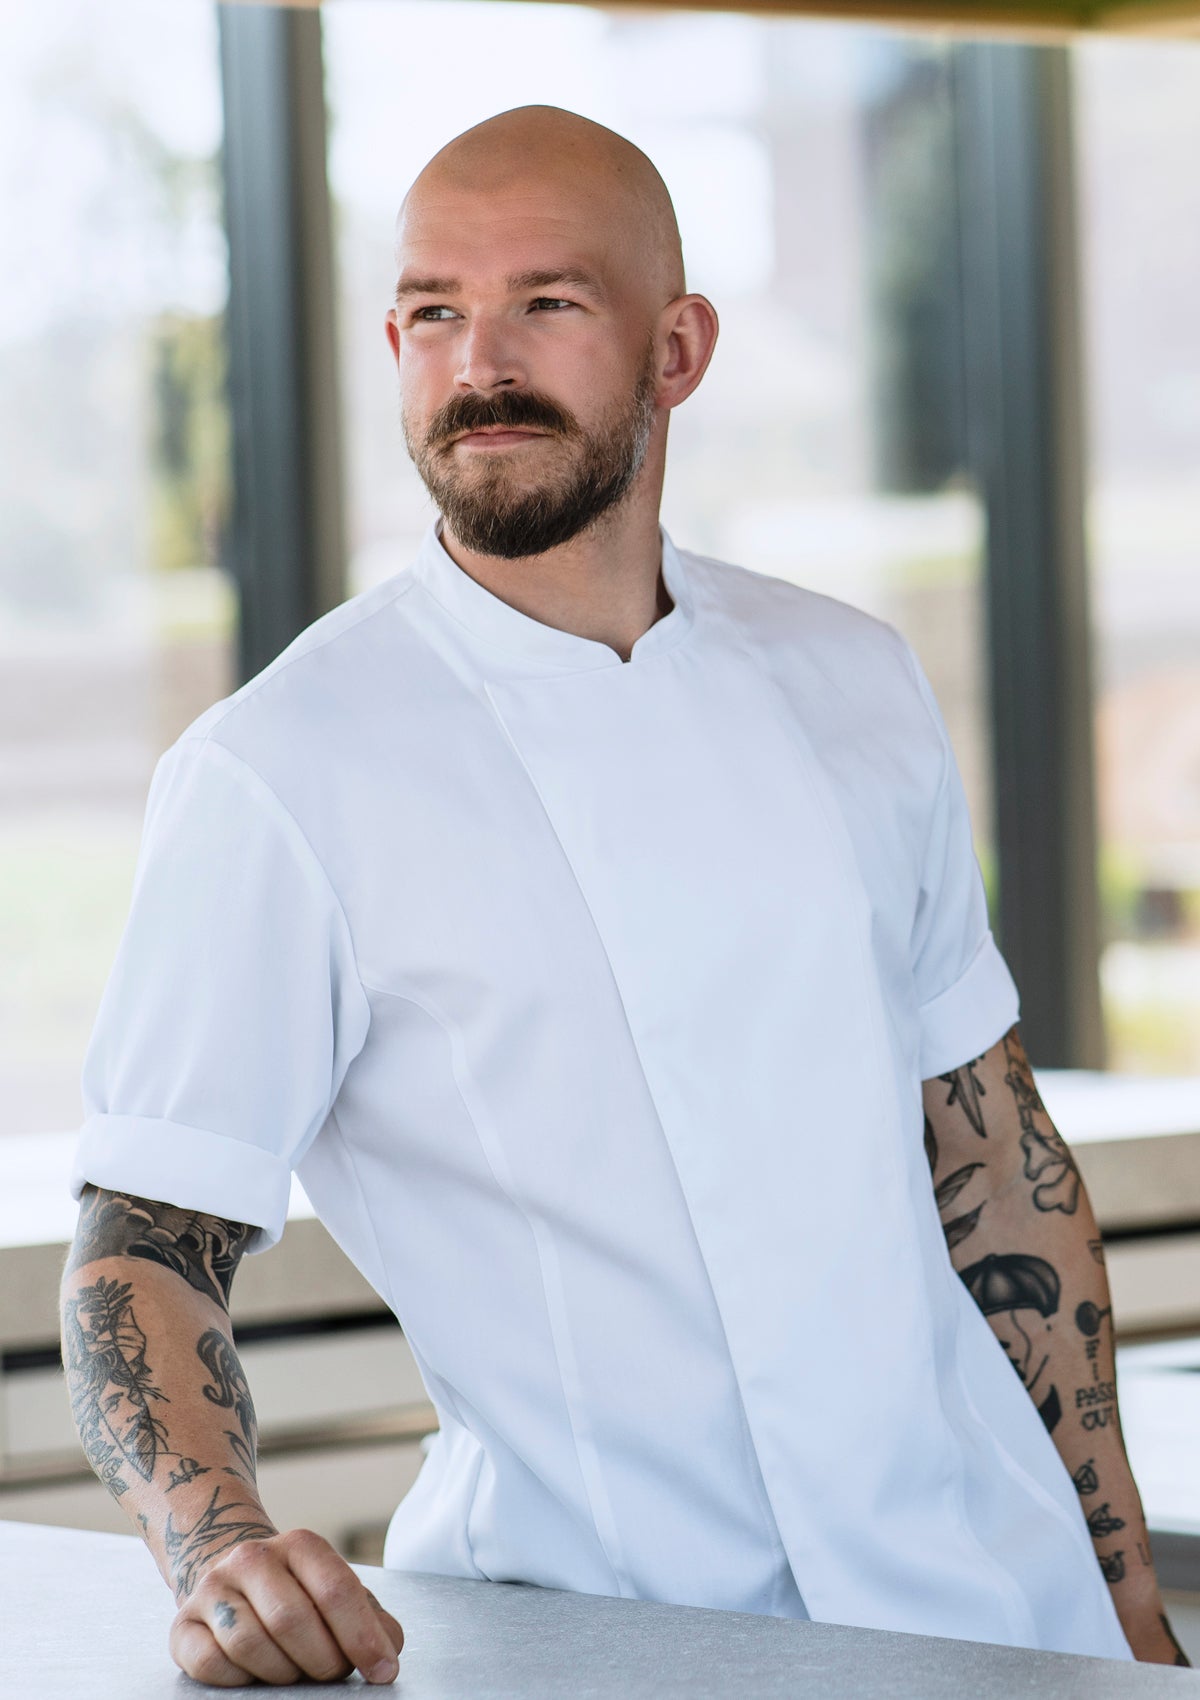 Chef Jacket With Stretch Panels Short-Sleeves Unisex